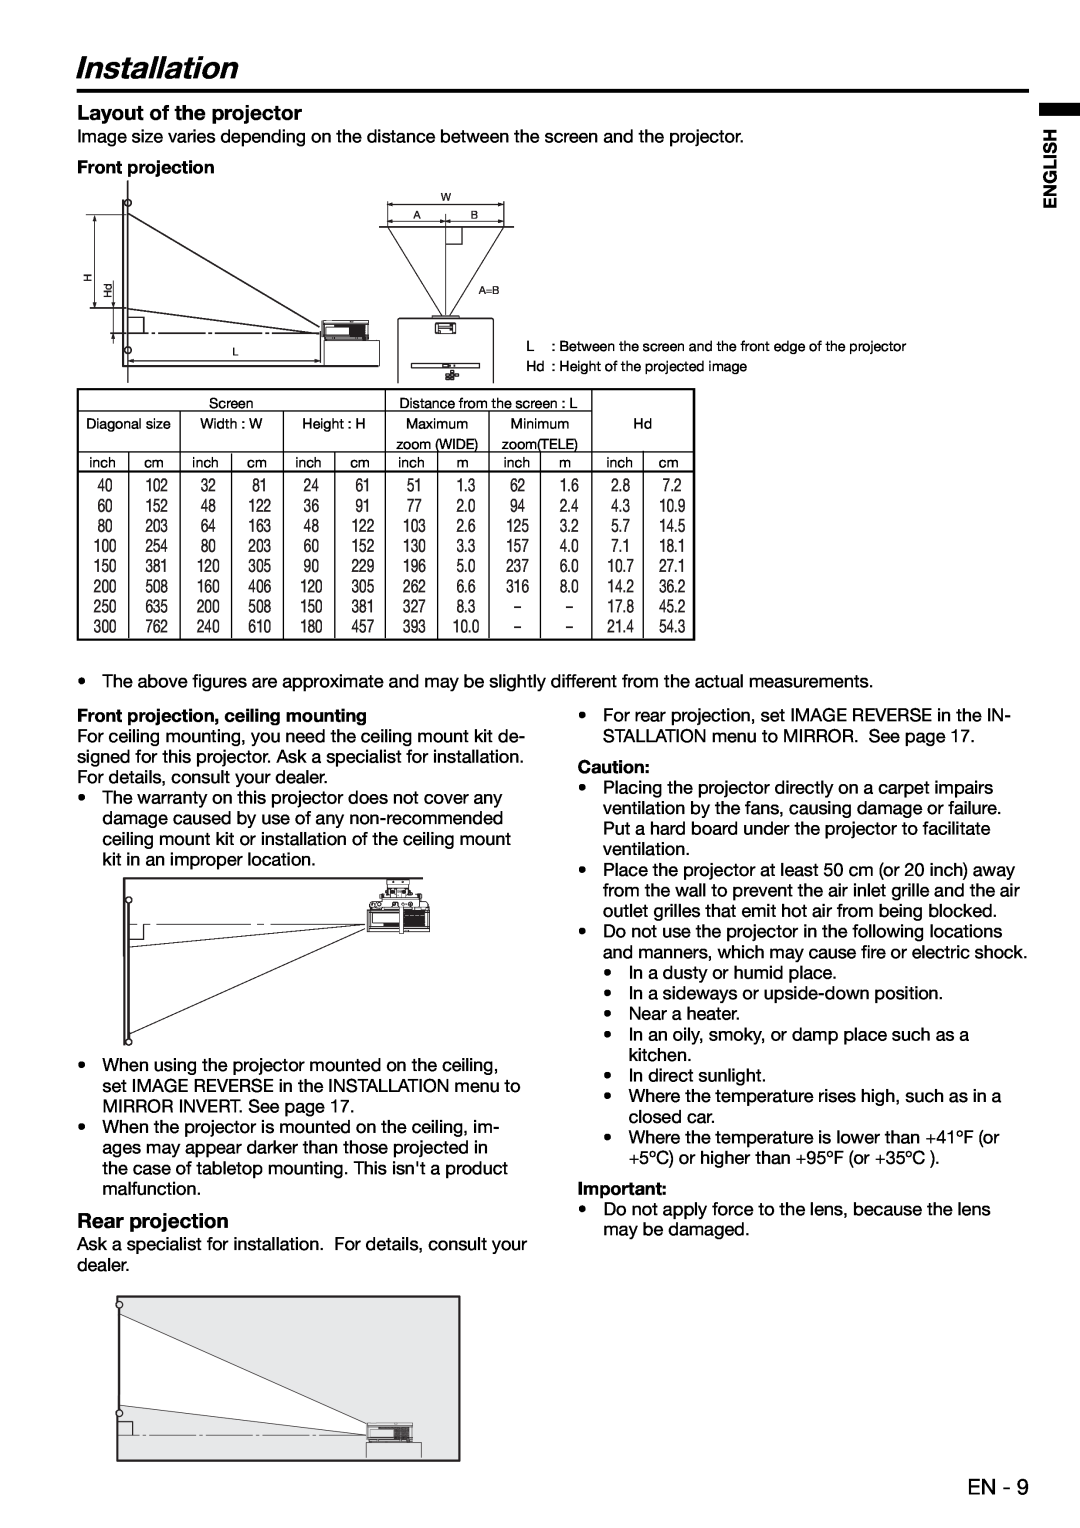 Mitsubishi Electronics XD480U user manual Installation, Layout of the projector, Rear projection 